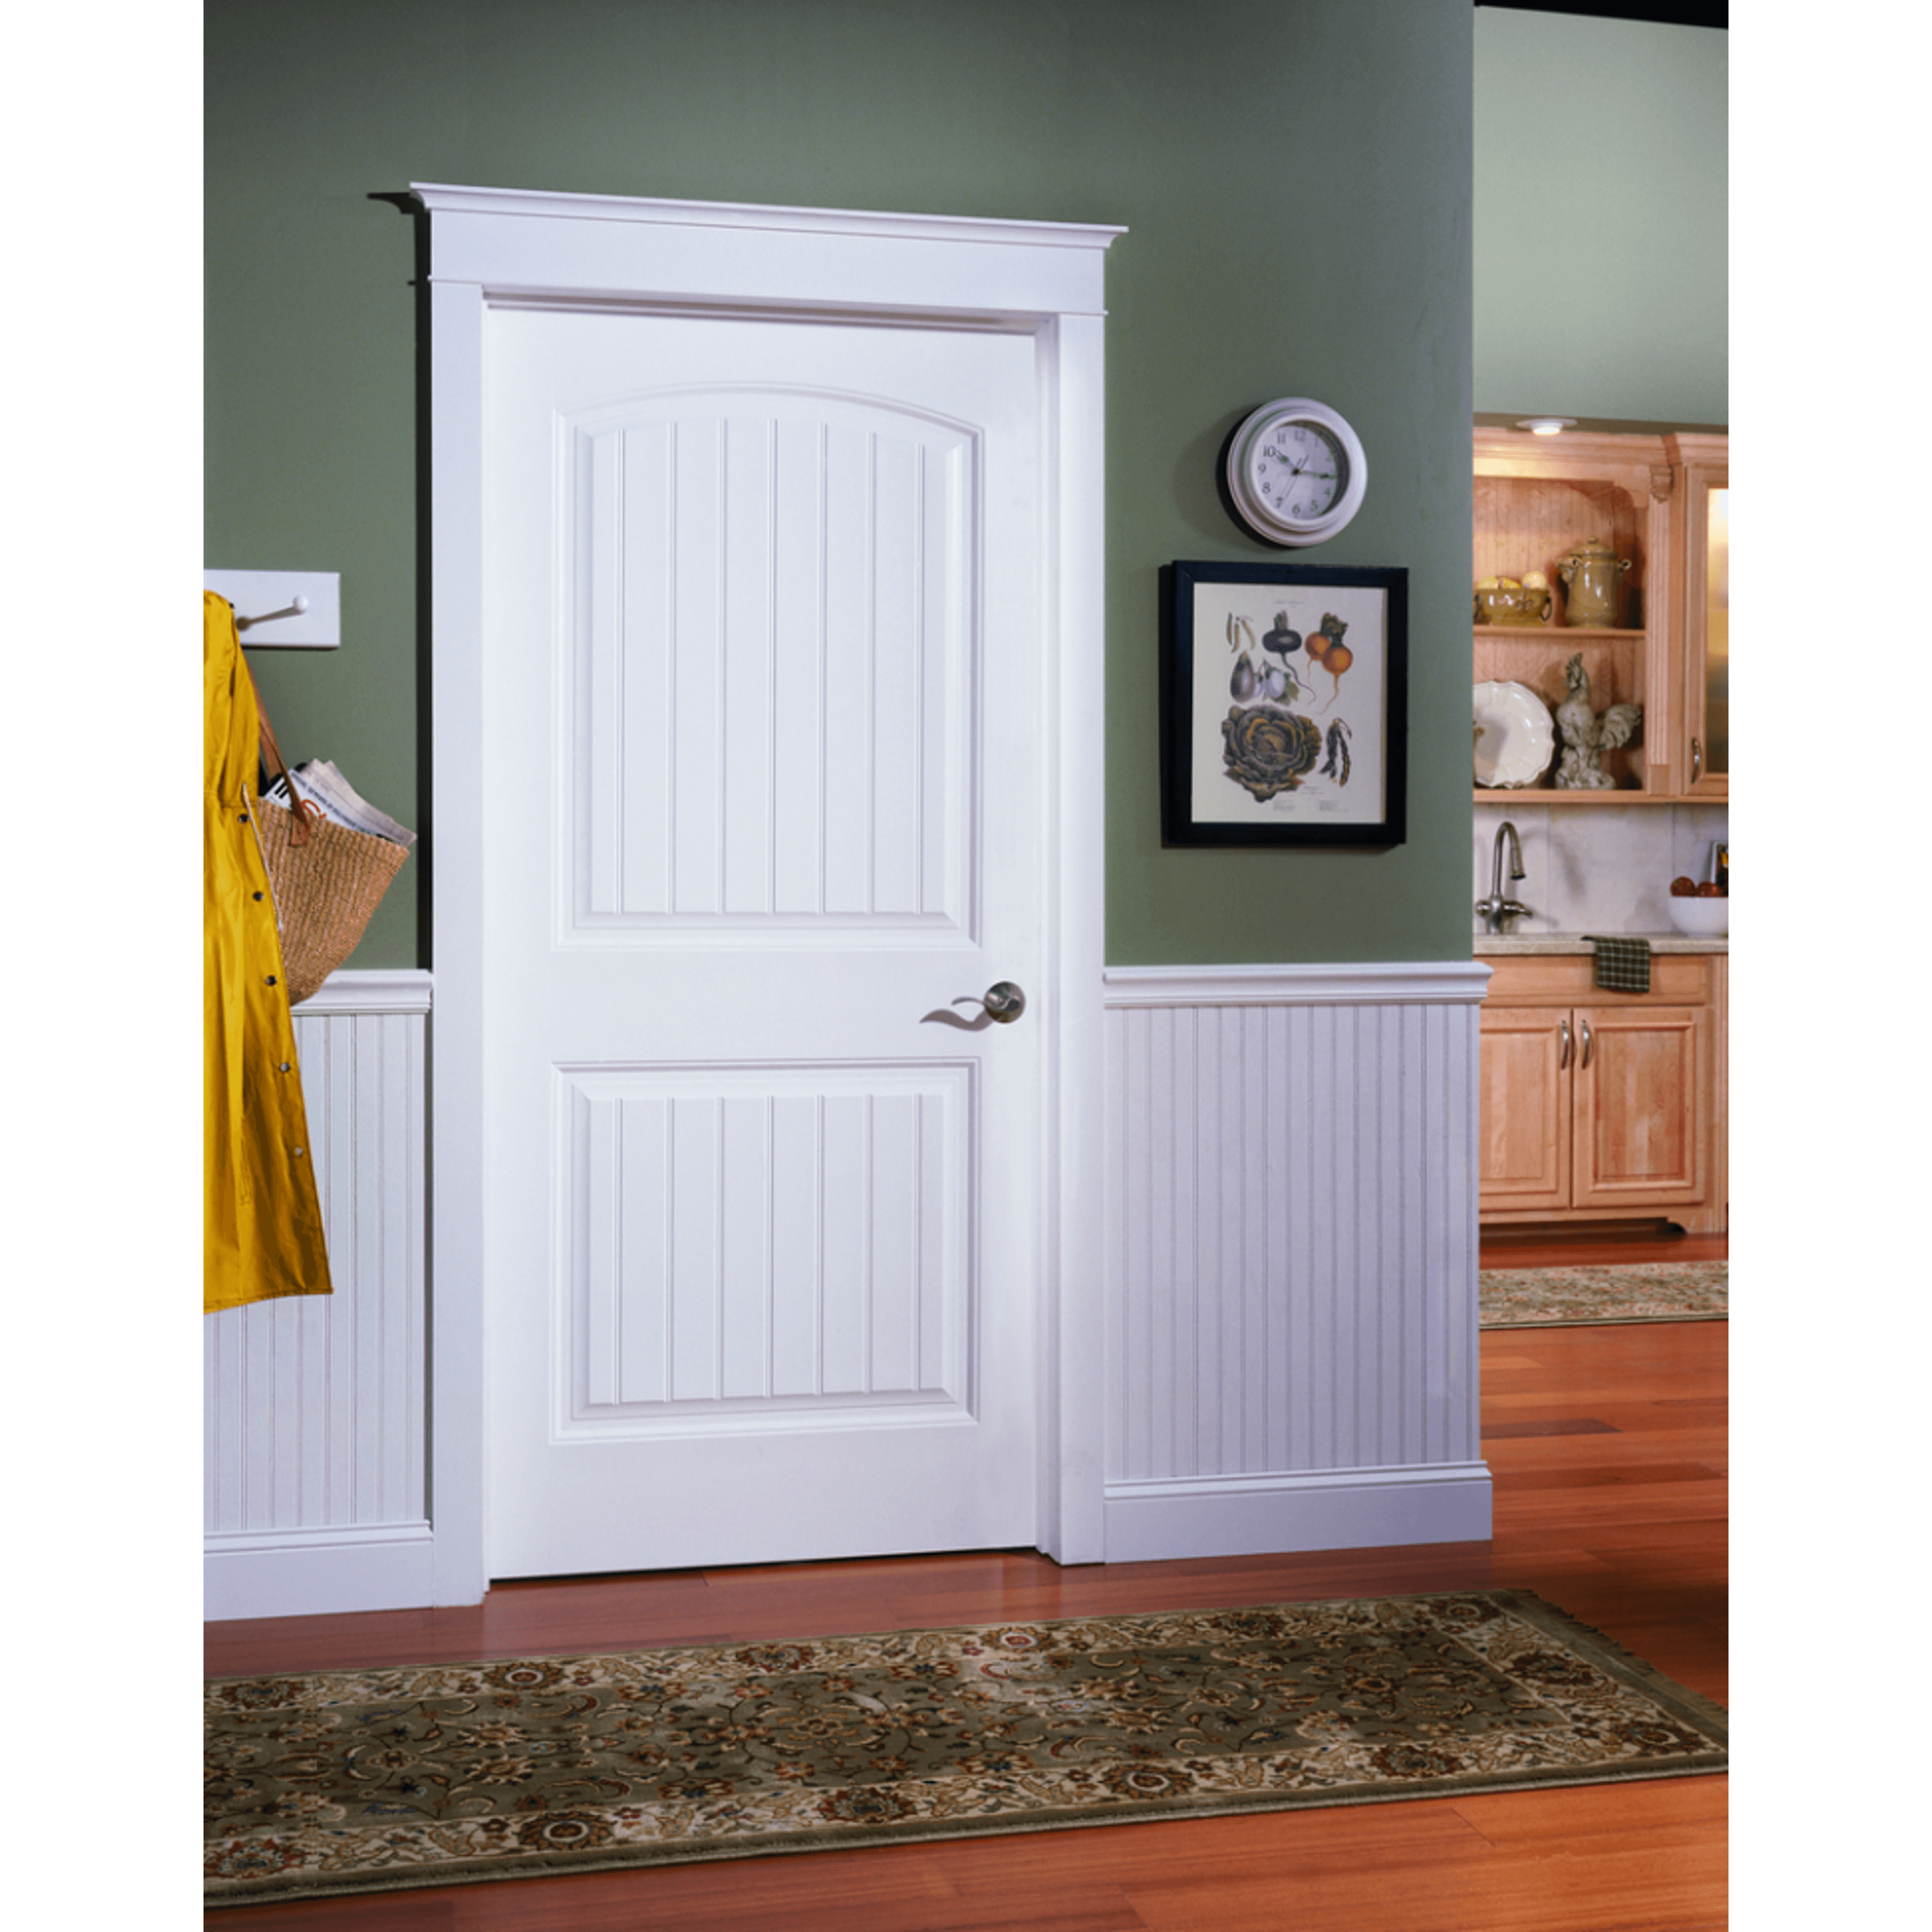 Cheyenne Door with Green Wall.png